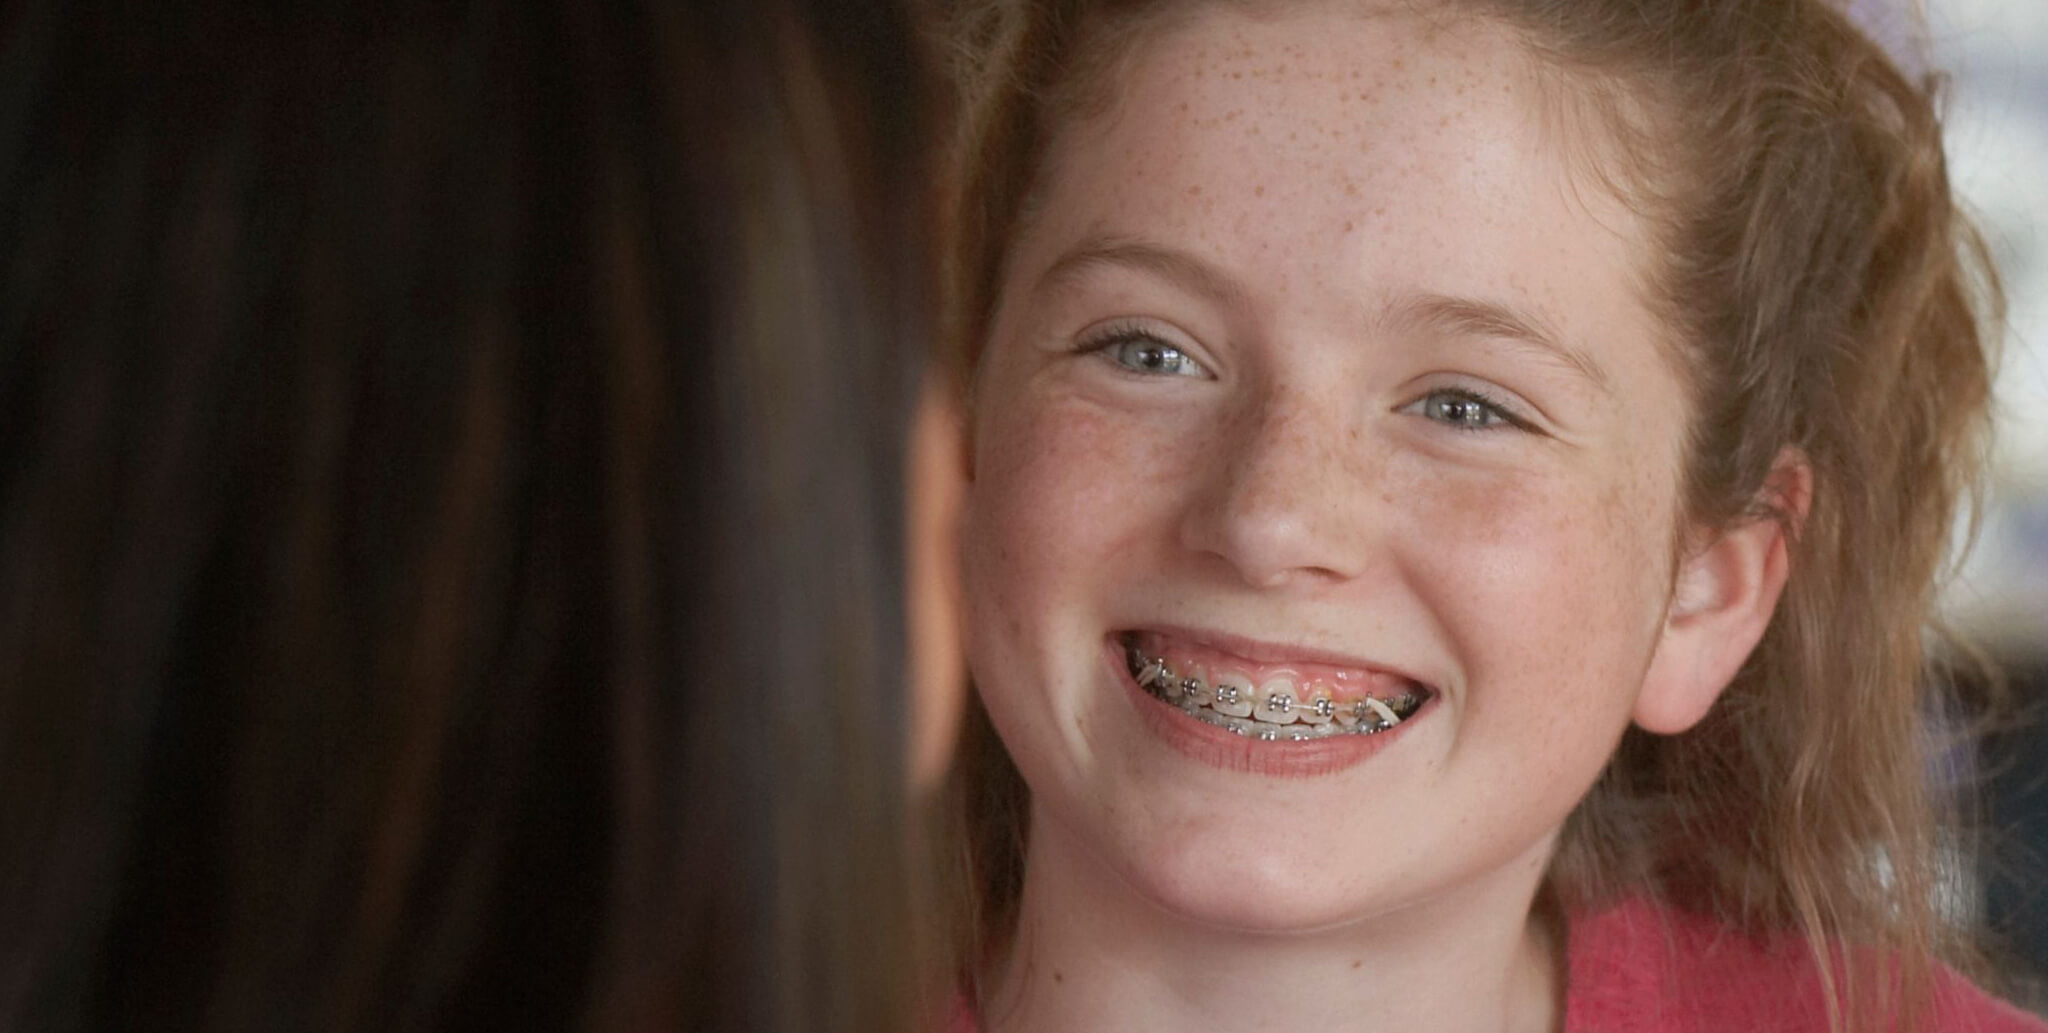 Bracing for Change: 5 Tips to Ease Your Child’s Fears about Orthodontics